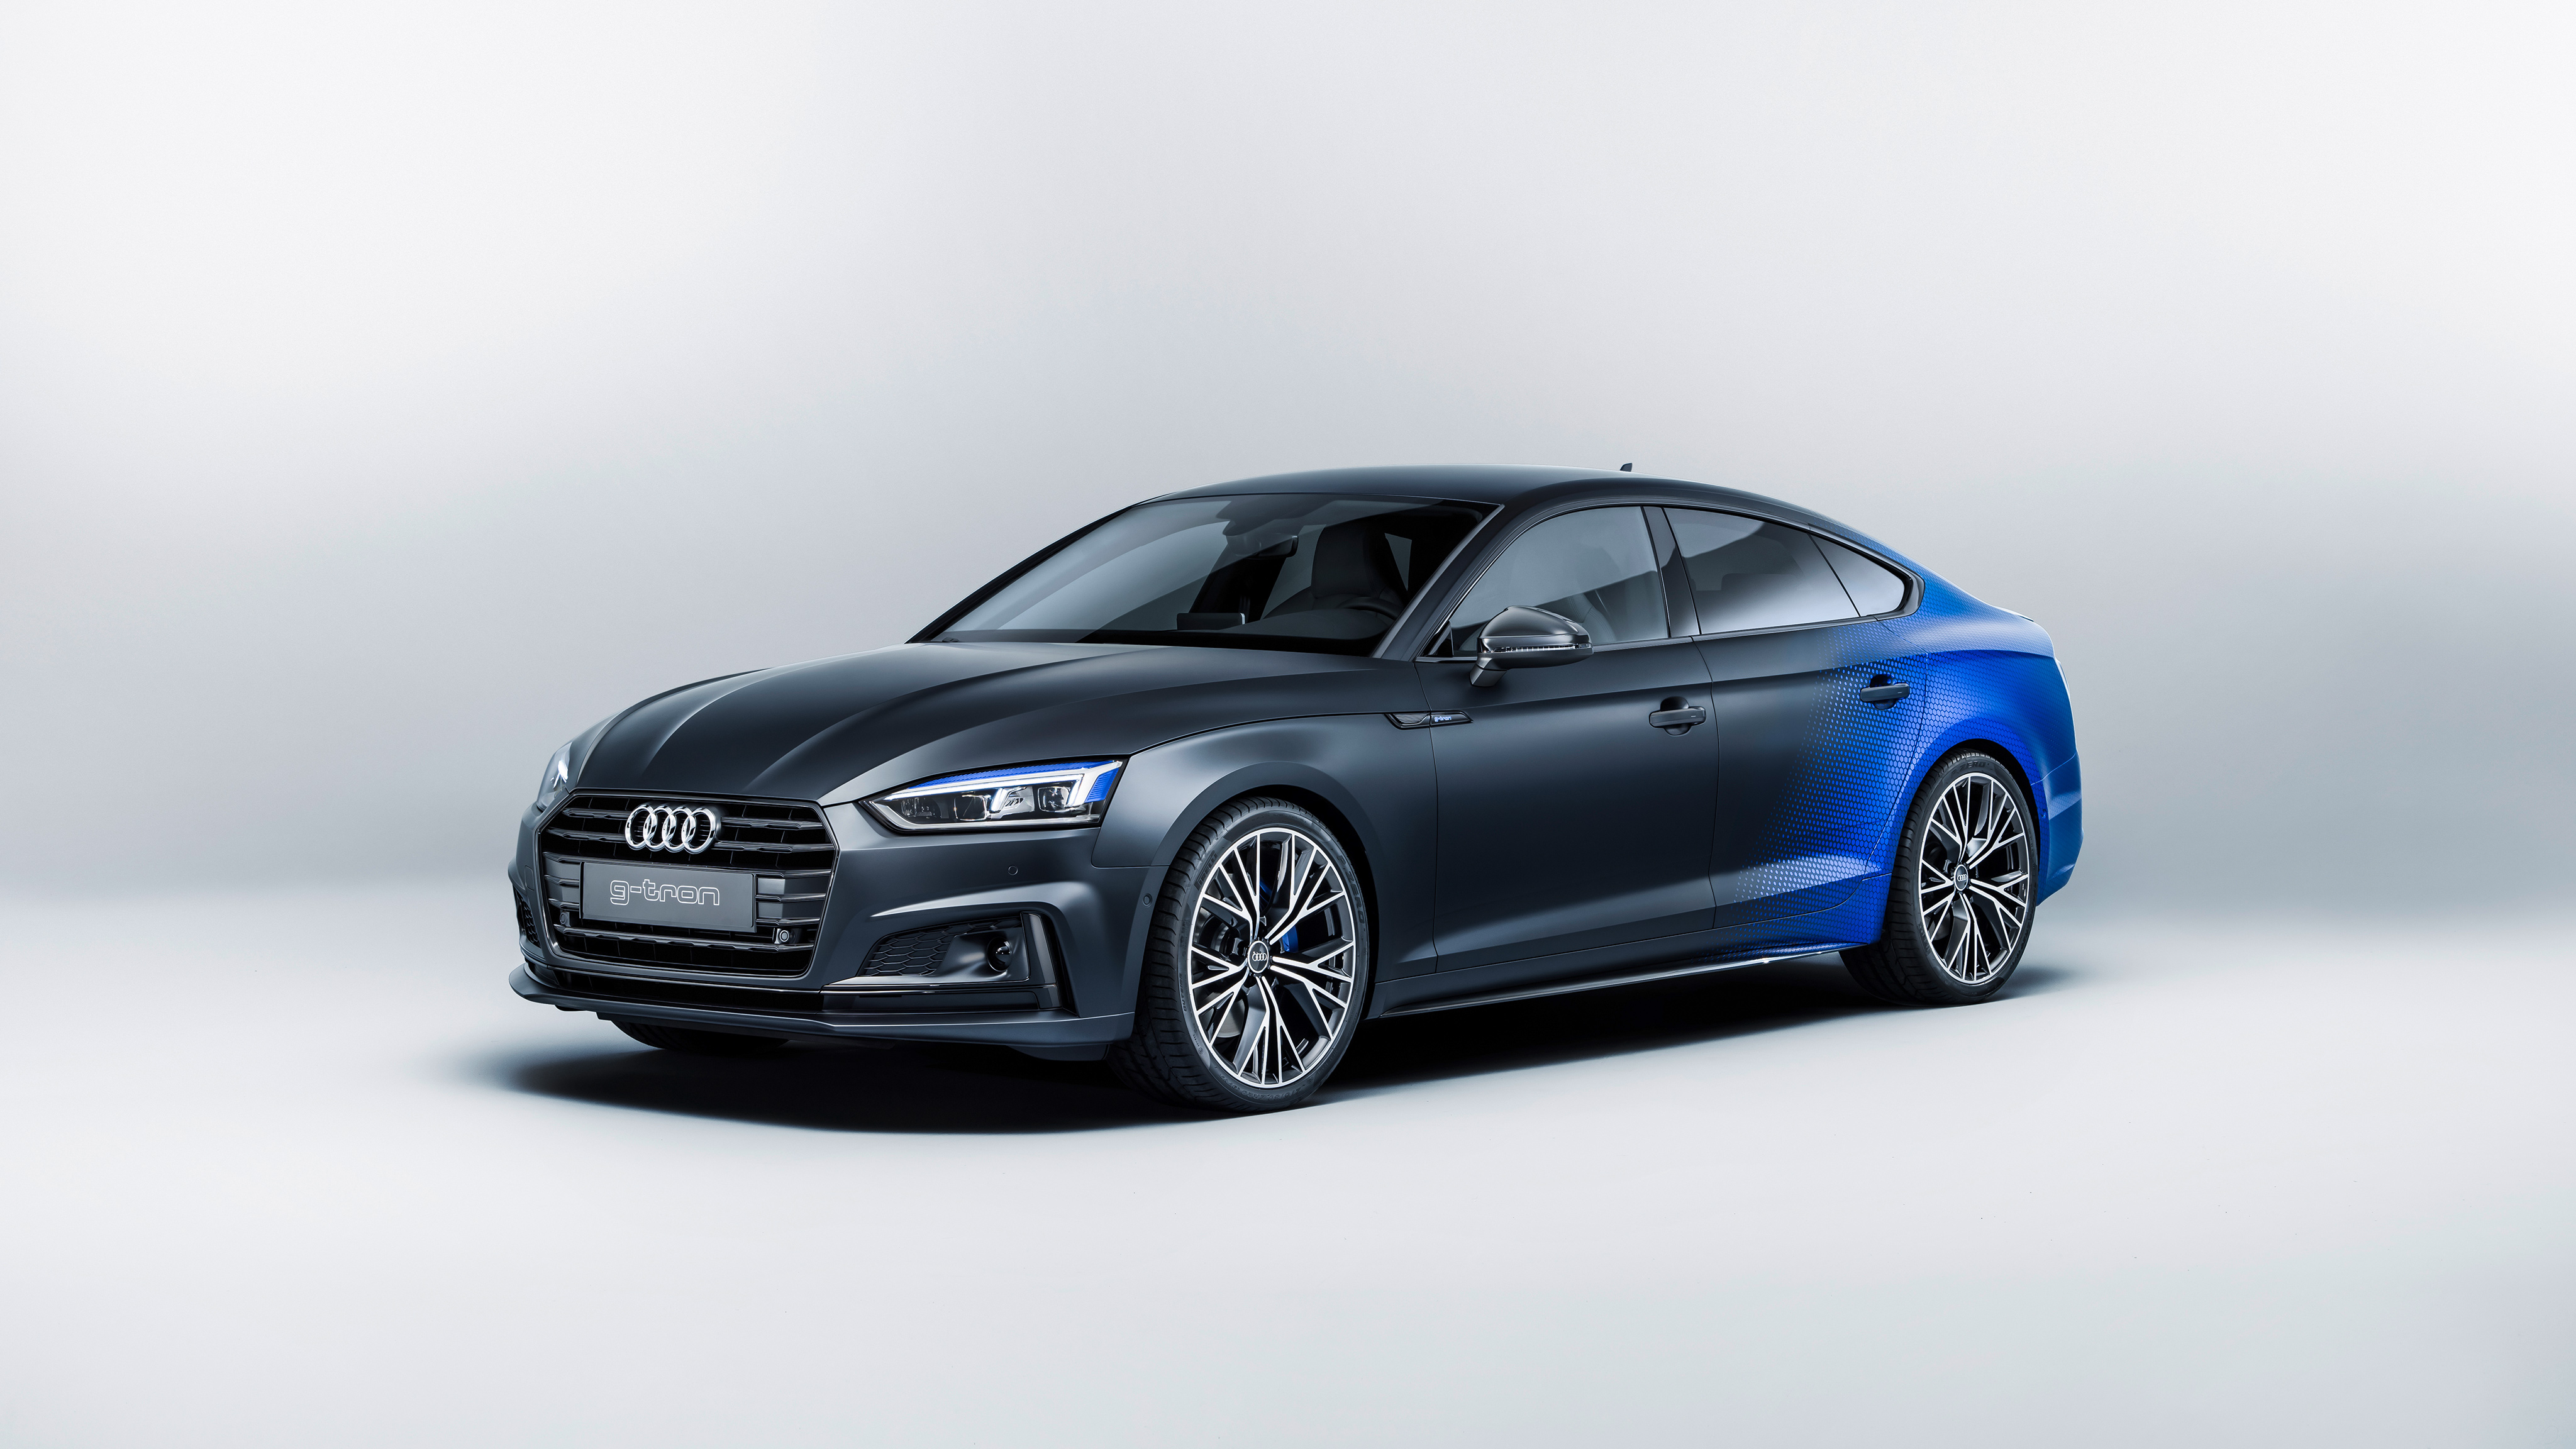 Audi A5 Sportback accessories restyling